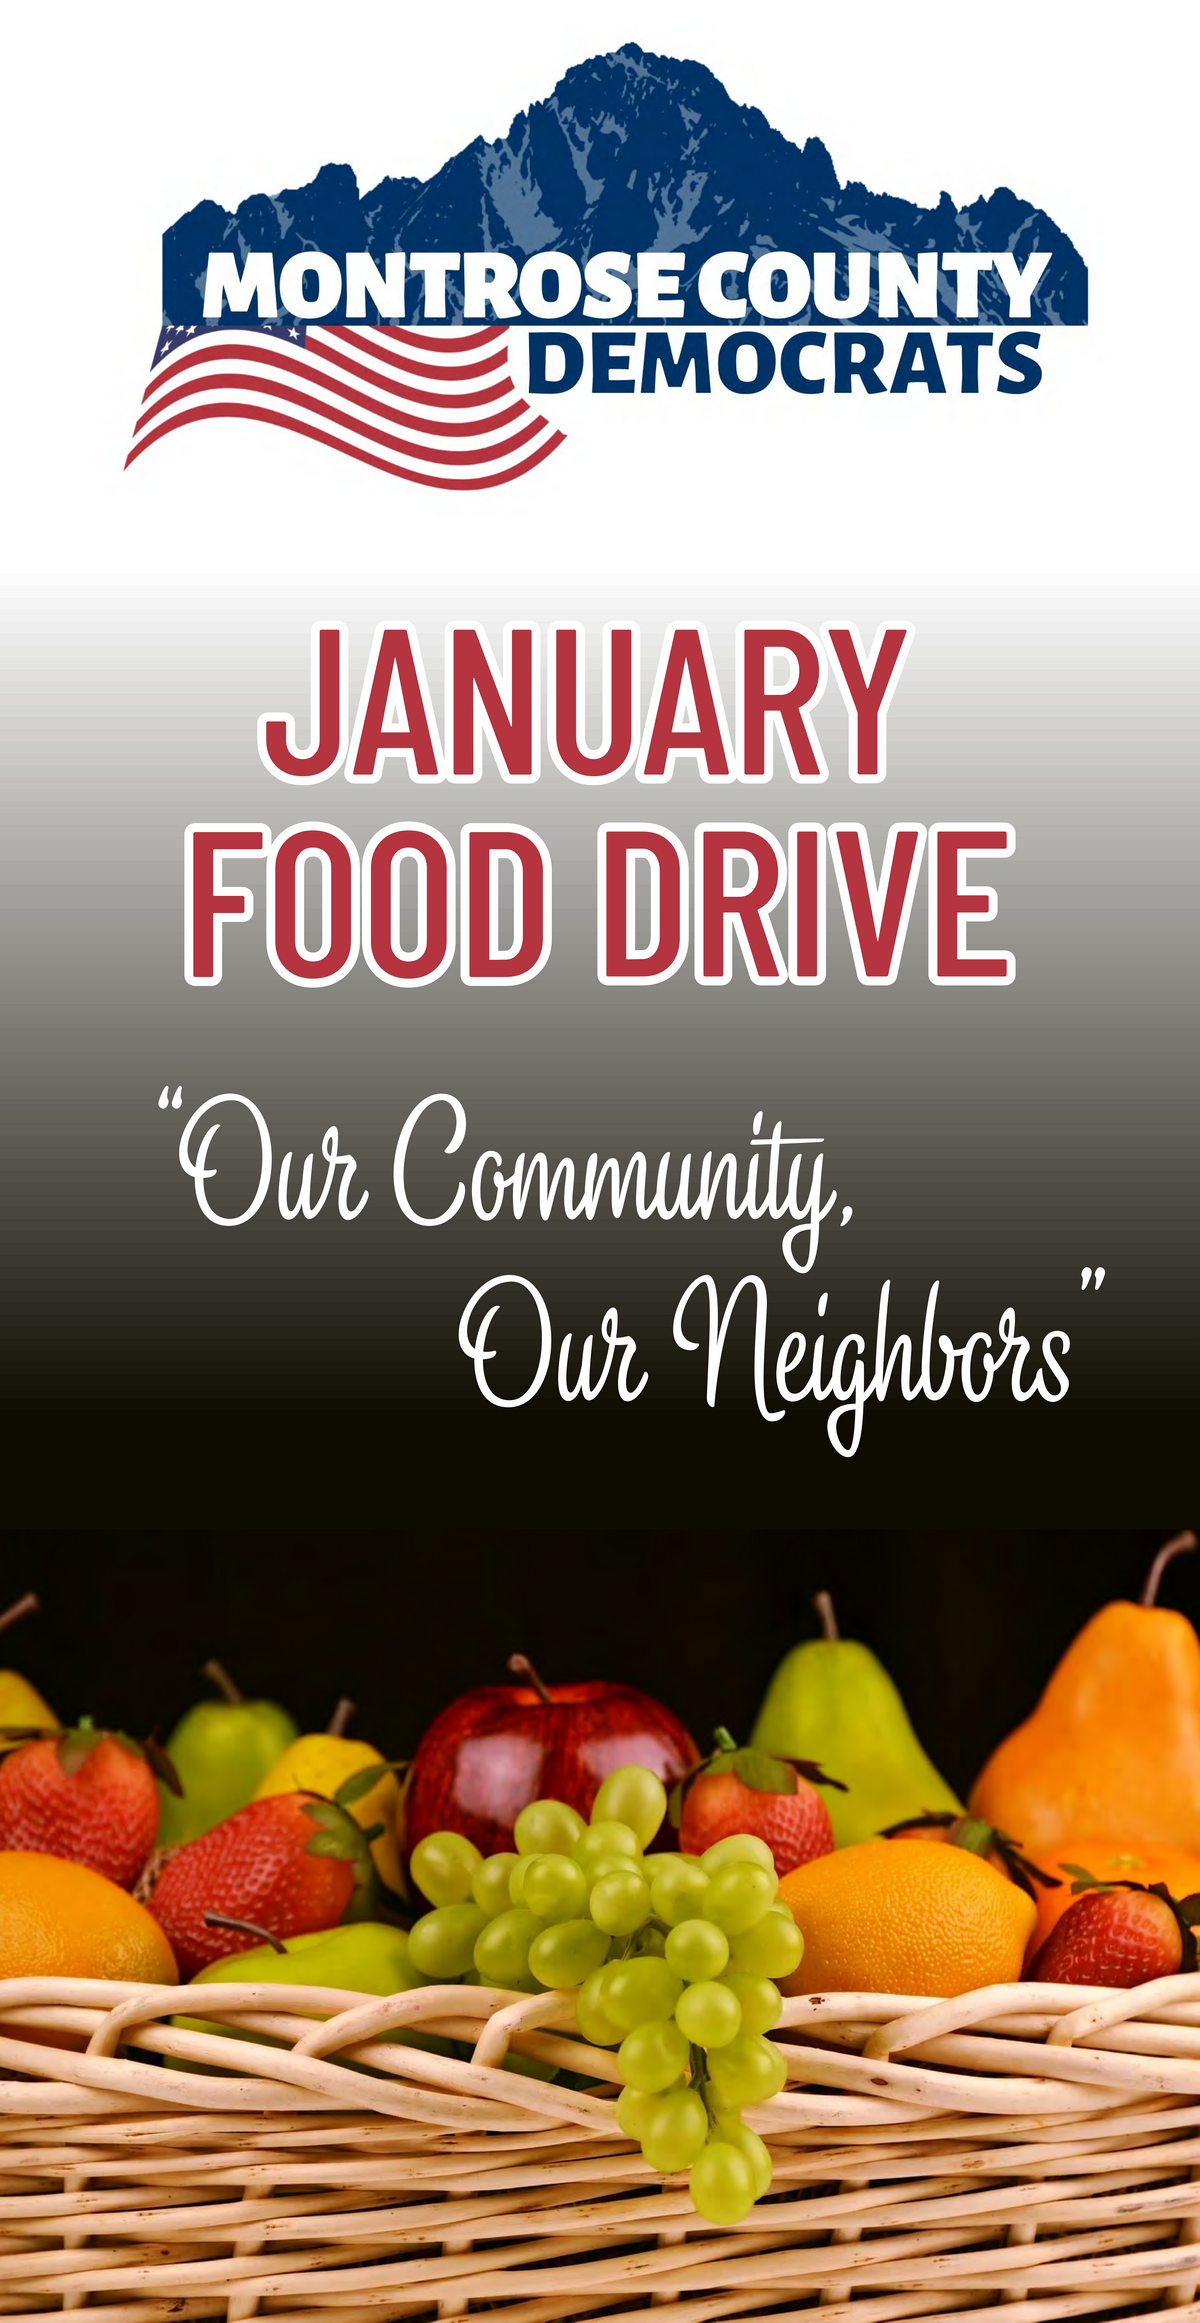 MCDP Food Drive during January 2021